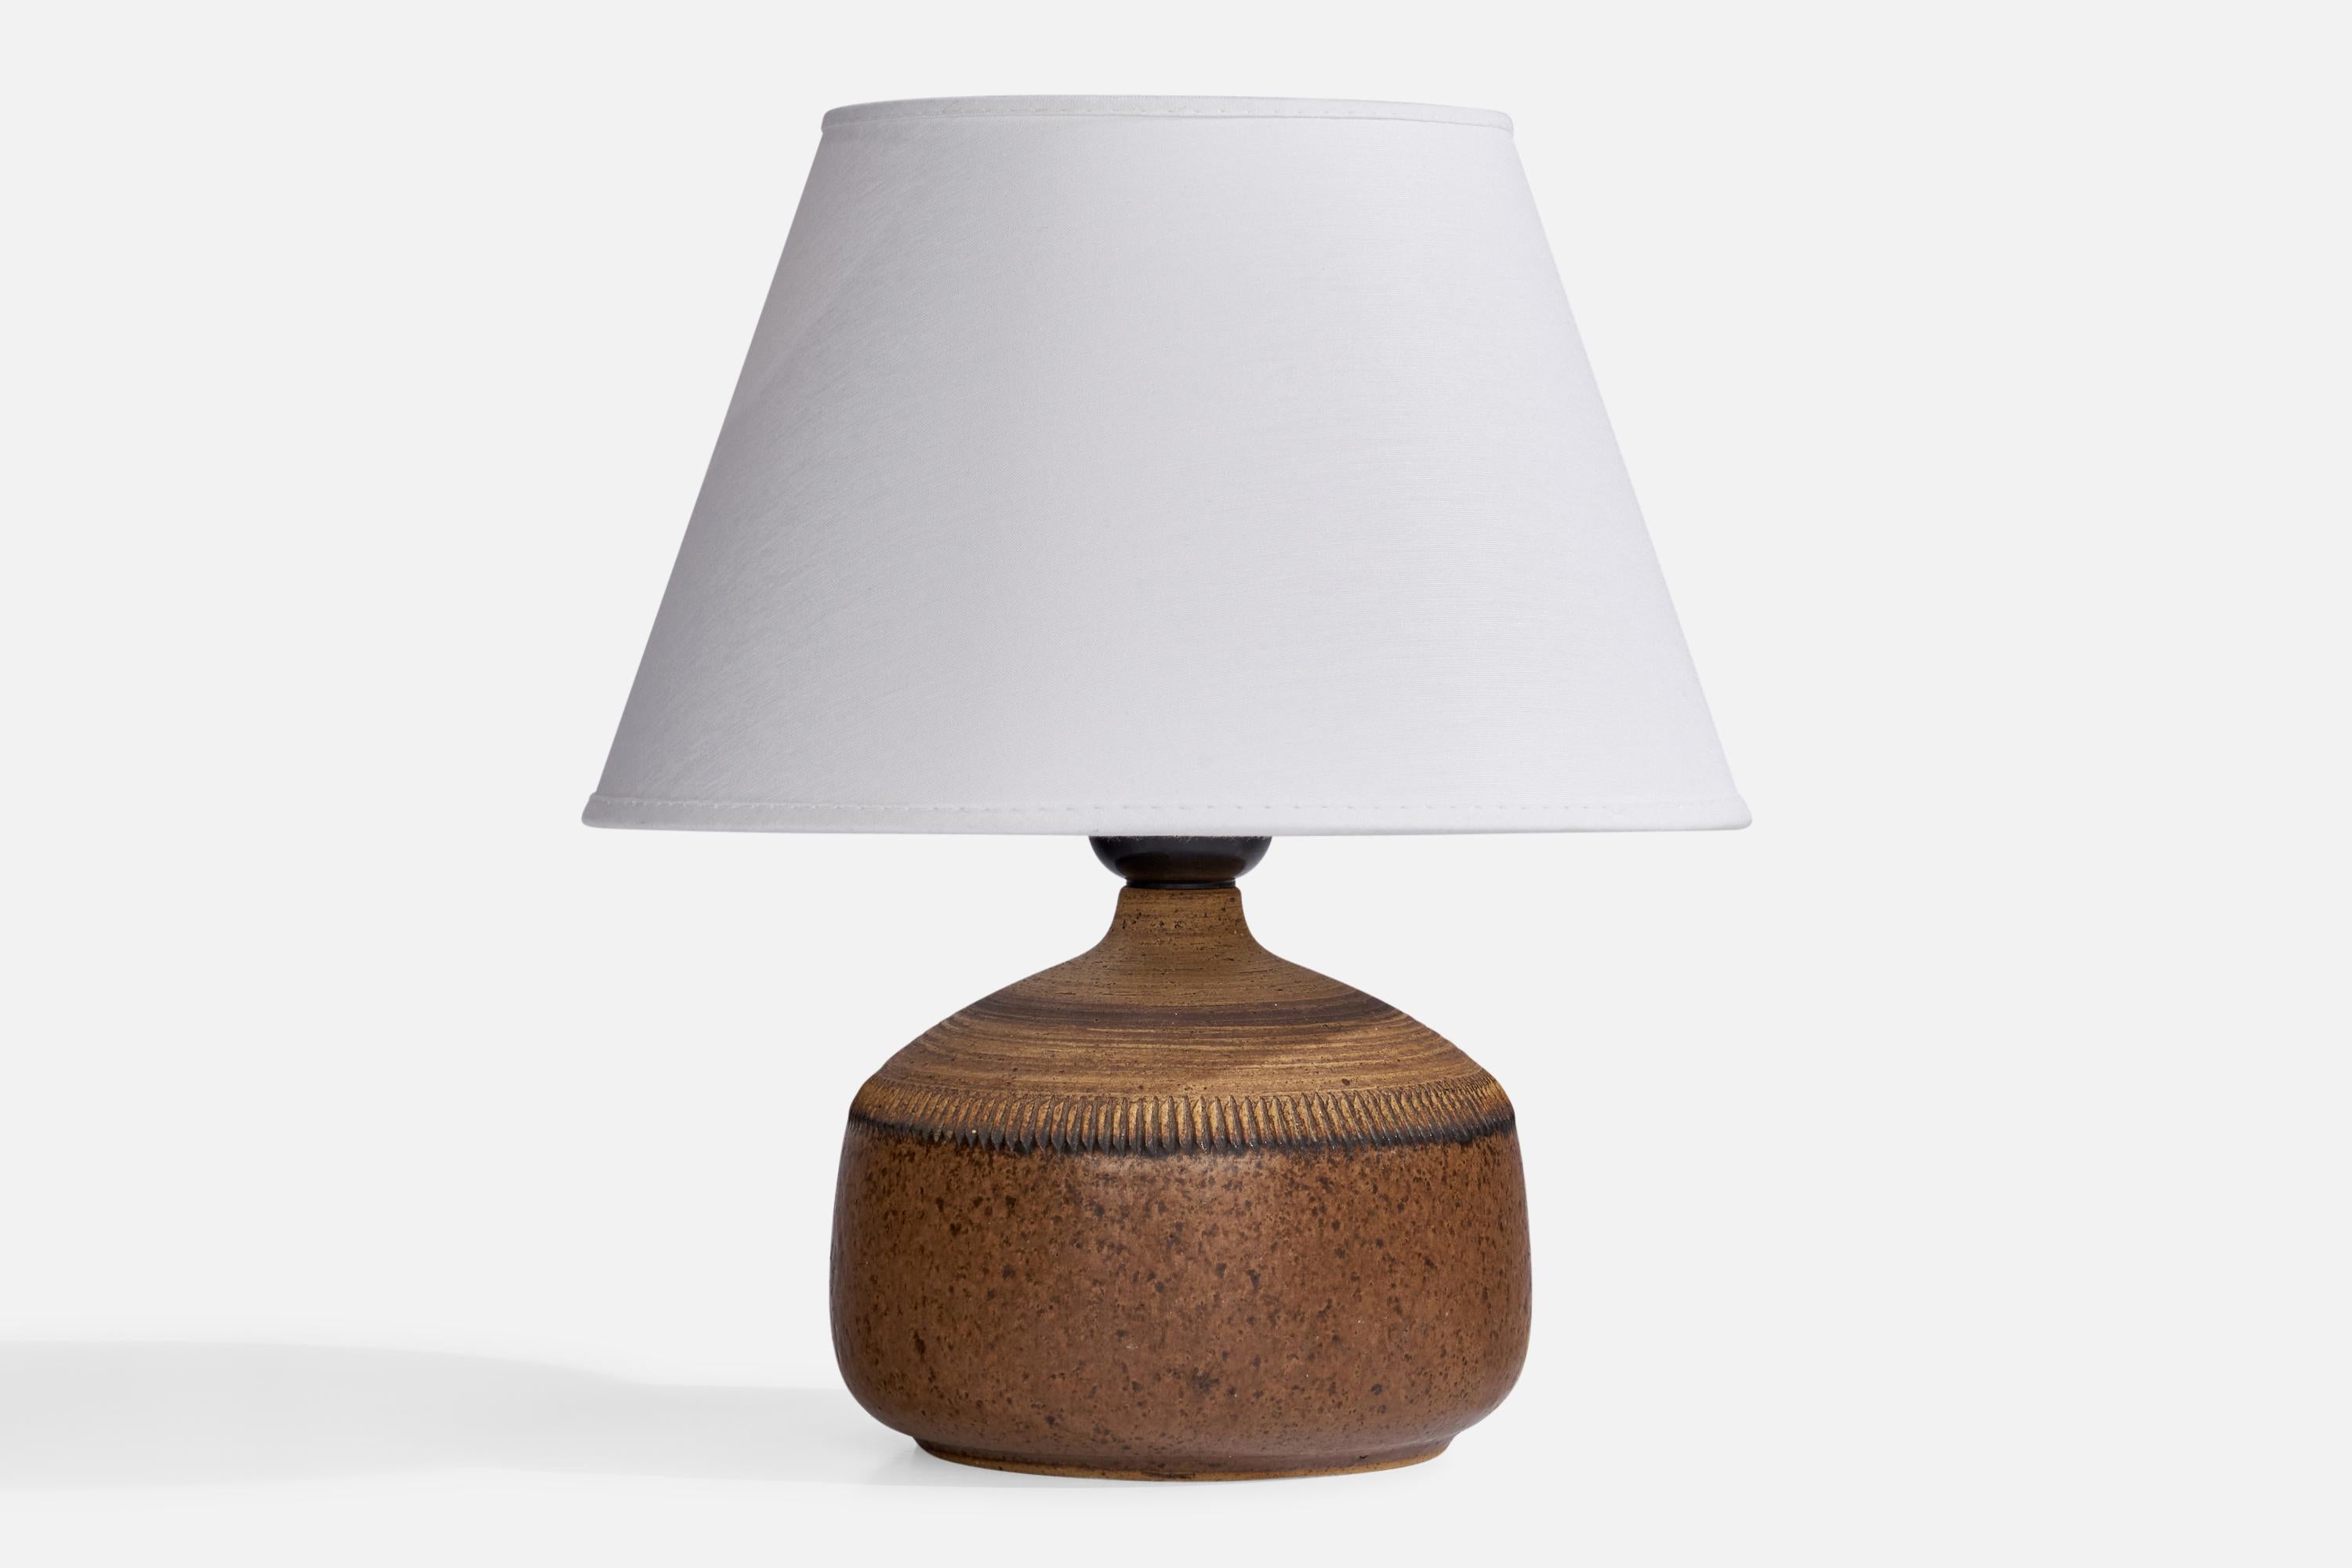 A brown-glazed stoneware table lamp designed and produced by Klase Höganäs, Sweden, 1960s.

Dimensions of Lamp (inches): 6.25” H x 5” Diameter
Dimensions of Shade (inches): 4.75” Top Diameter x 8.25” Bottom Diameter x 5.25”
Dimensions of Lamp with